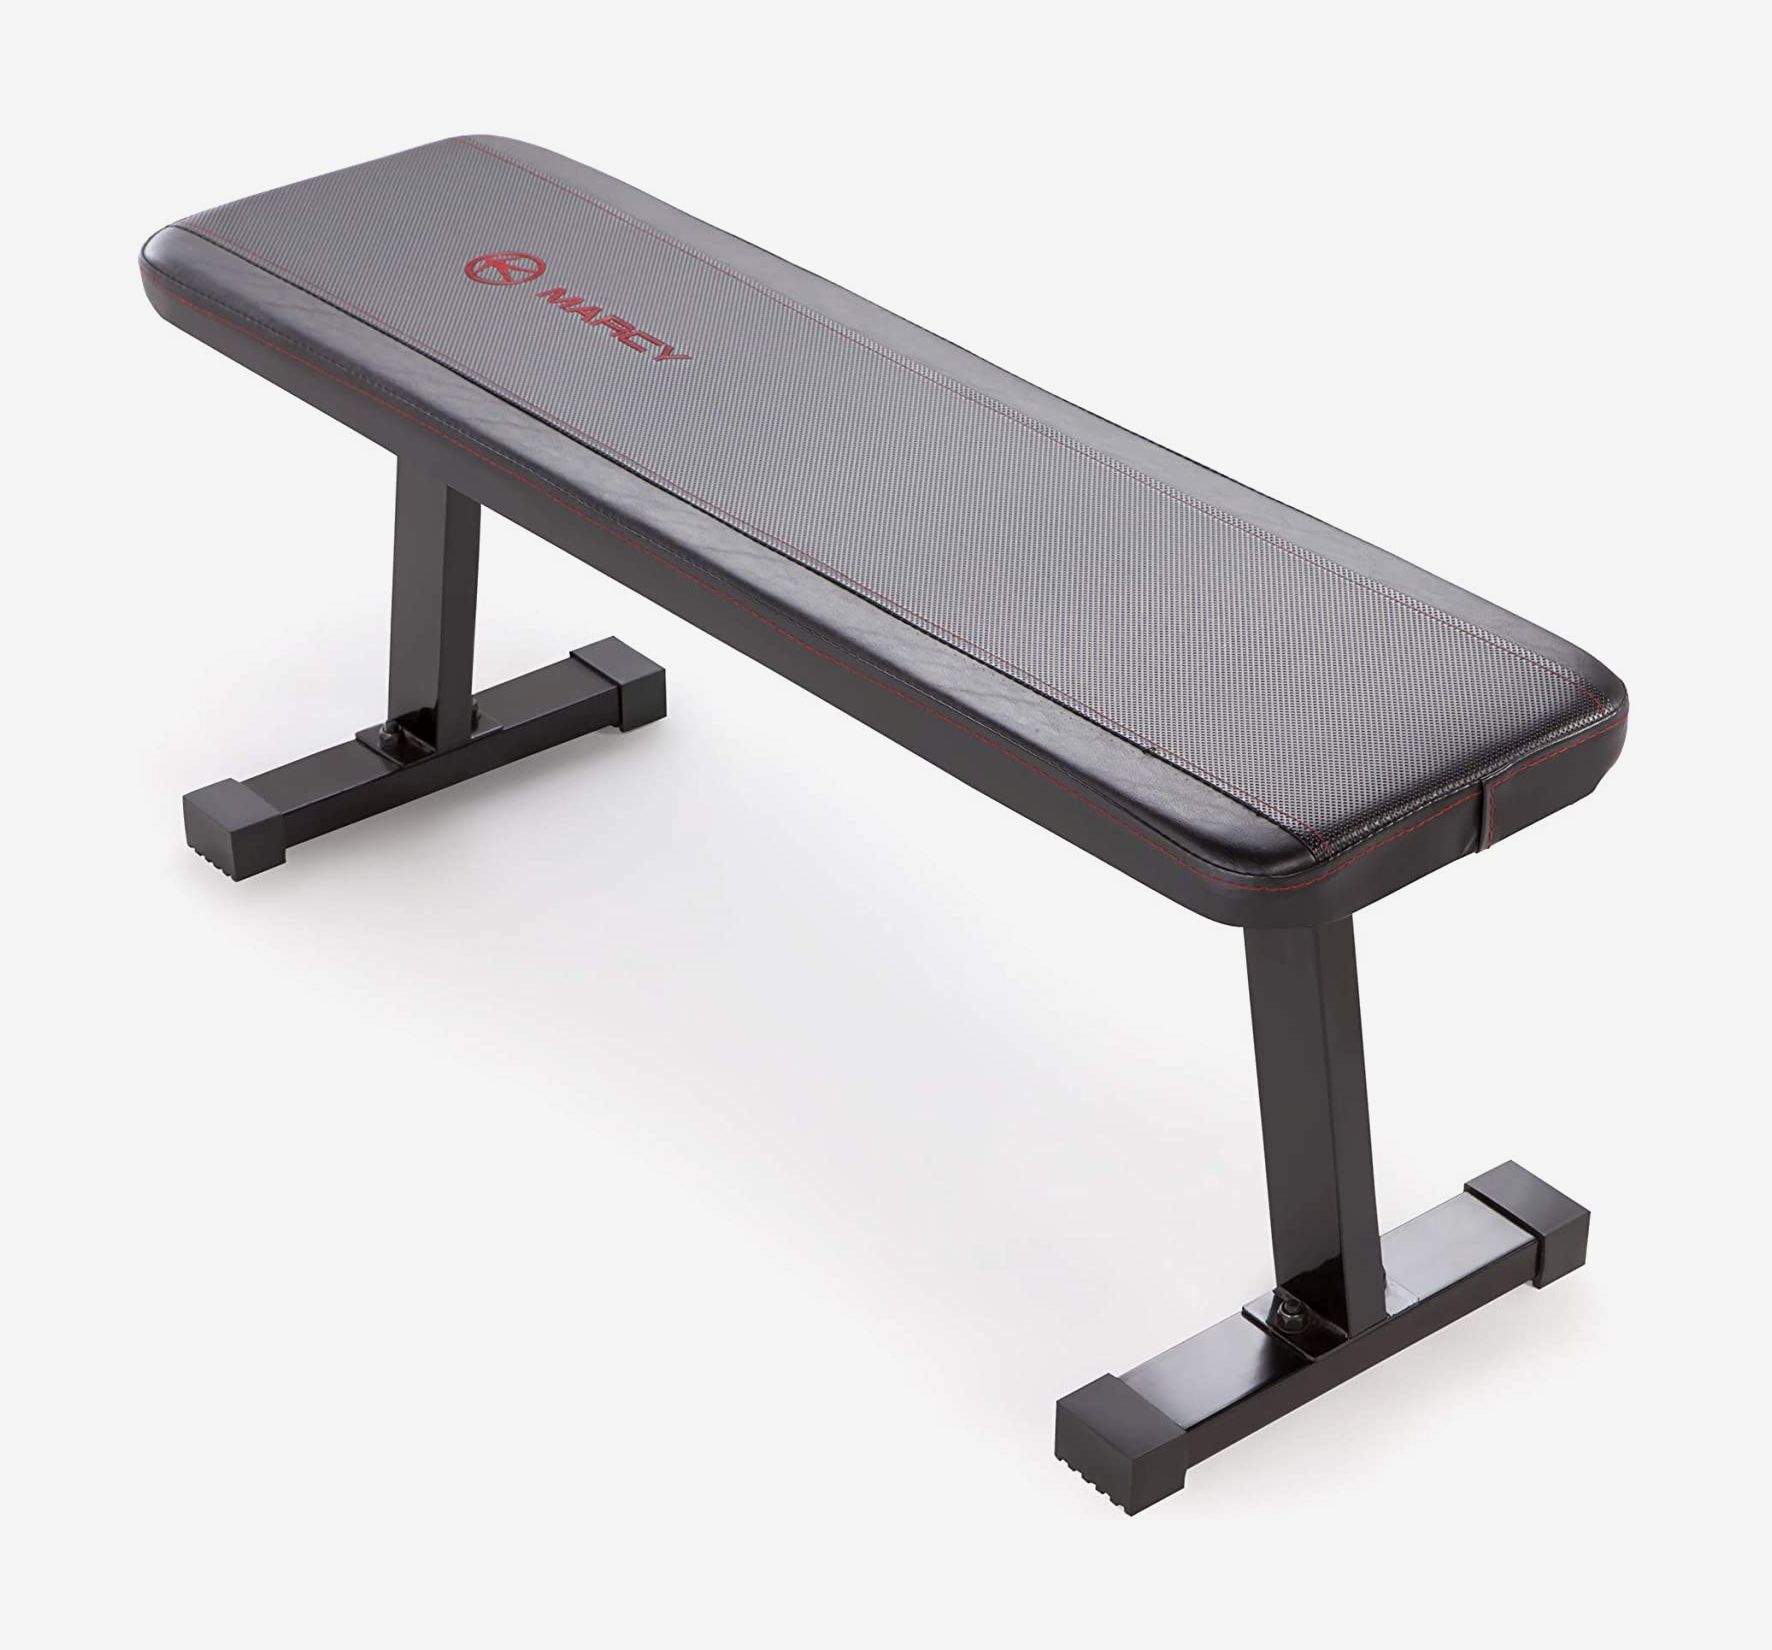 Gym designer review of top functional fitness benches — wellness